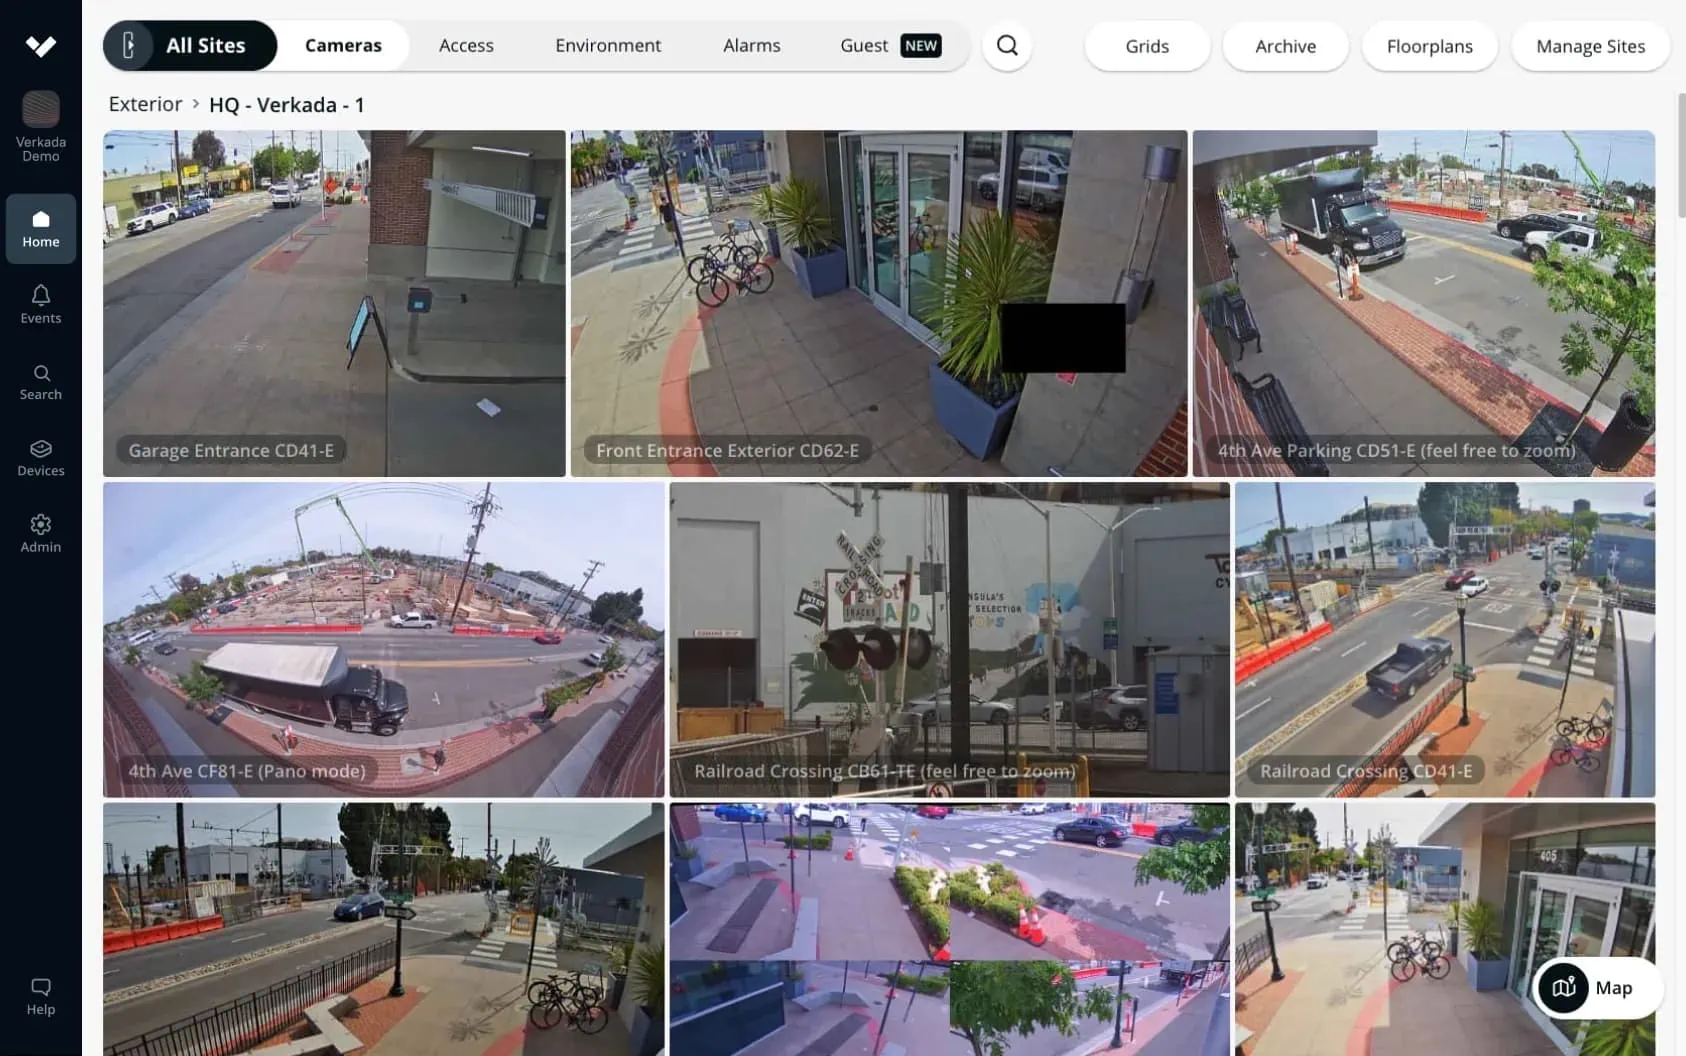 Remote monitoring with white security cameras